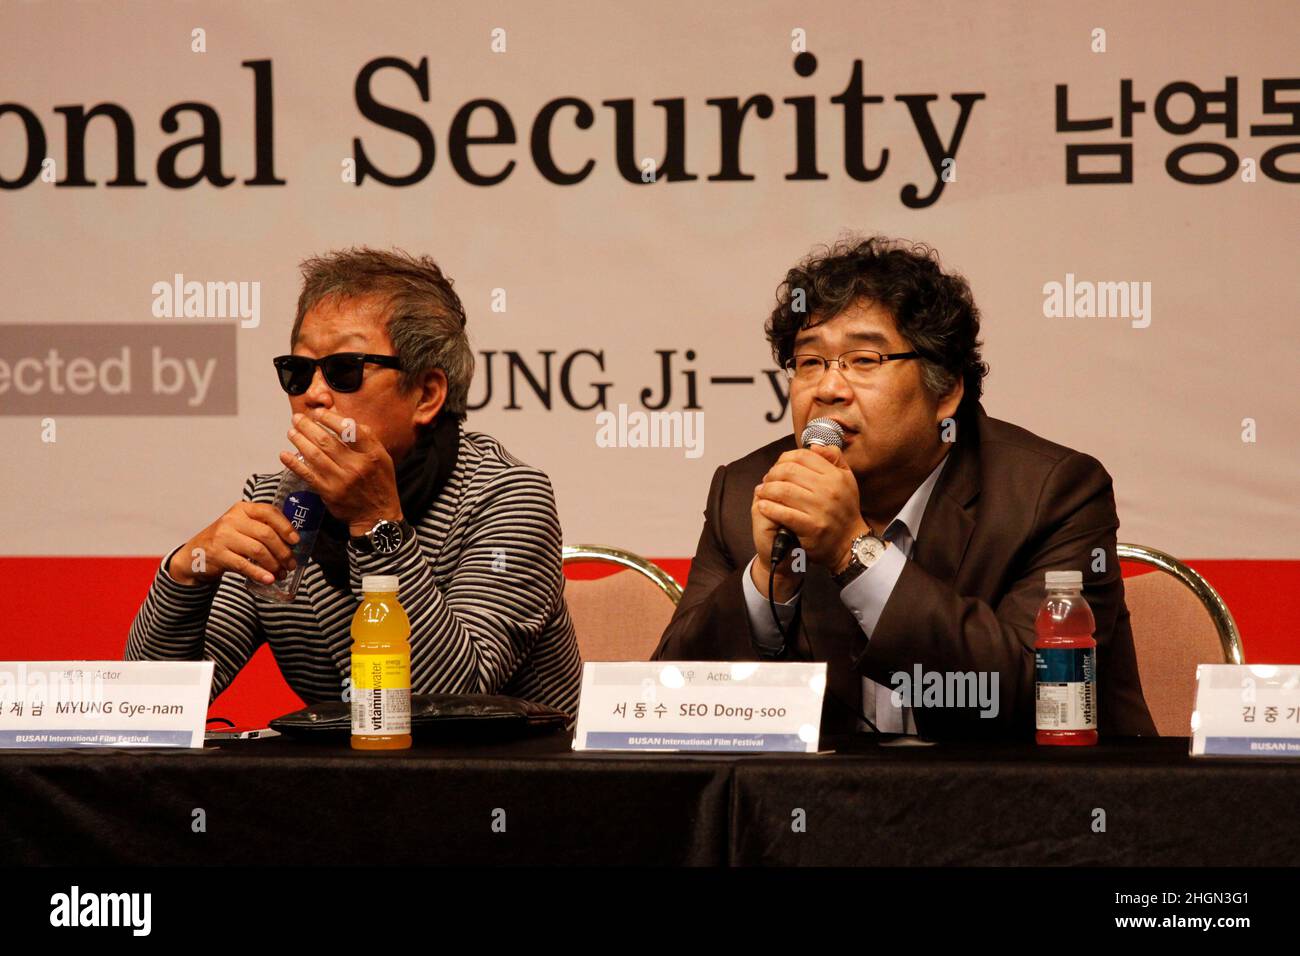 October 6, 2012 - Busan, South Korea : (From lest) Actor Myung Gye Nam and Seo Dong Soo attend their new film `National Security 1985` Gala Presentation event at the CGV Theater. The film based on the memoir of a democracy activist who was tortured in the 1980s by South Korea's military rulers is provoking discussion about the country's not-so-distant authoritarian past and the influence it will have on this year's presidential election. (Ryu Seung-il / Polaris) Stock Photo